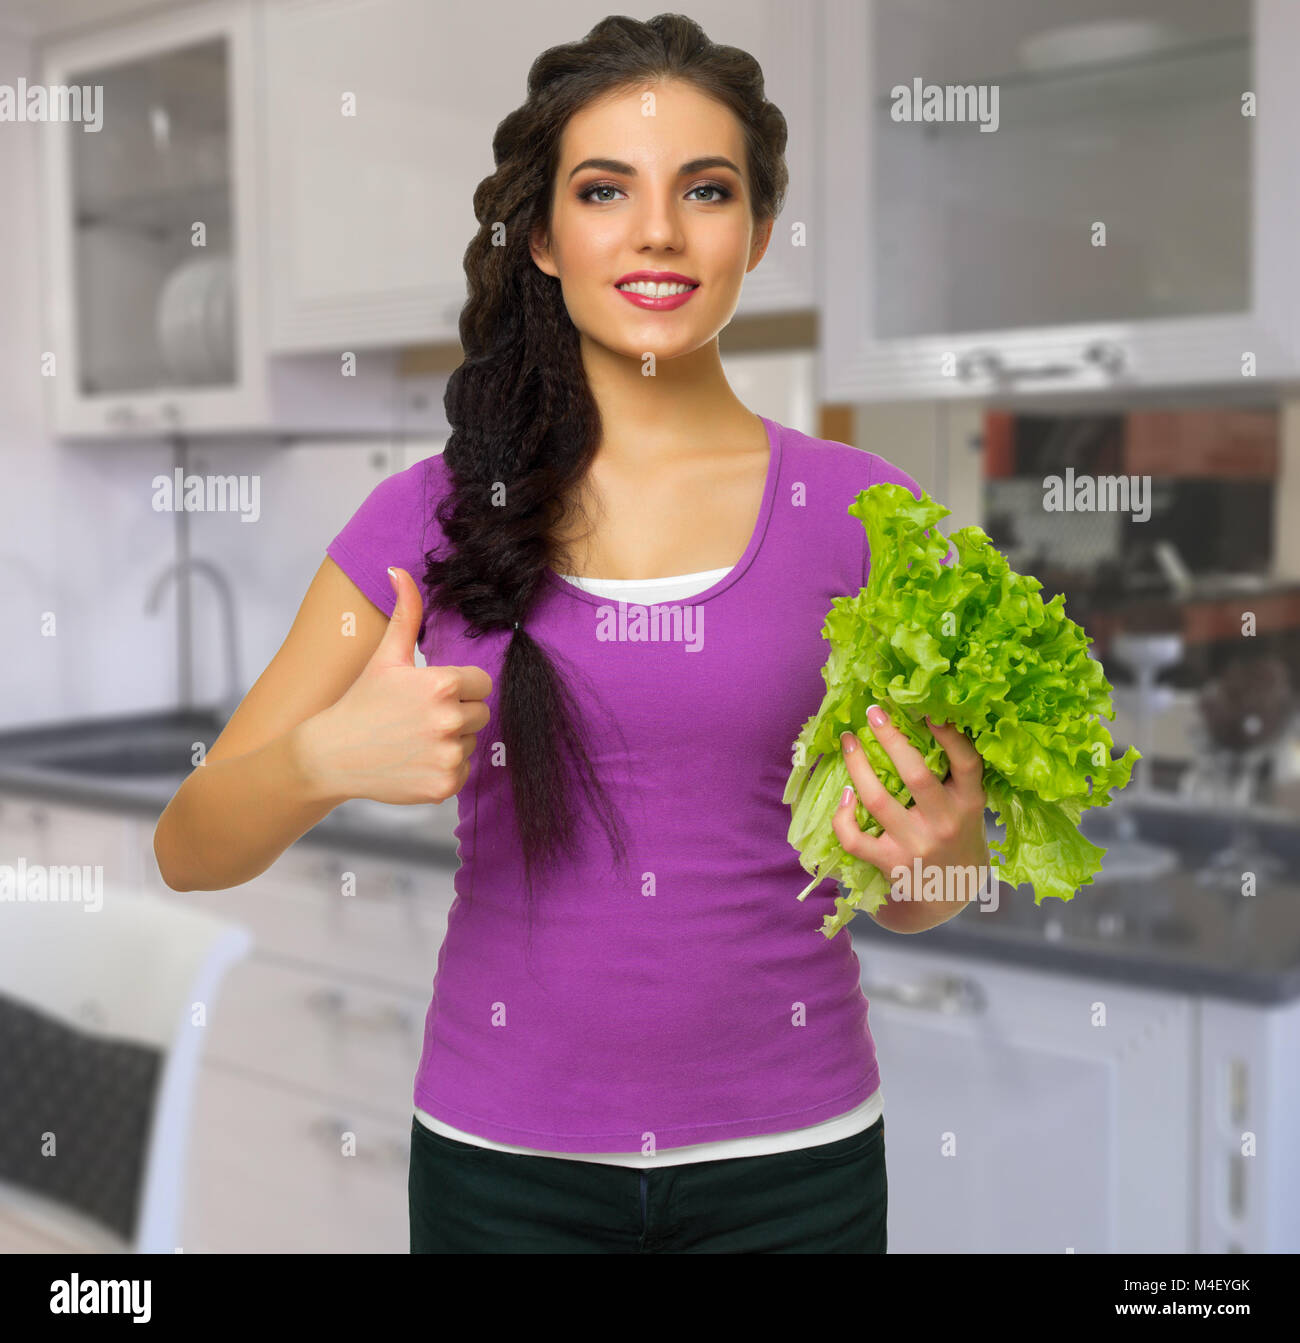 Young cooking woman at kitchen Stock Photo